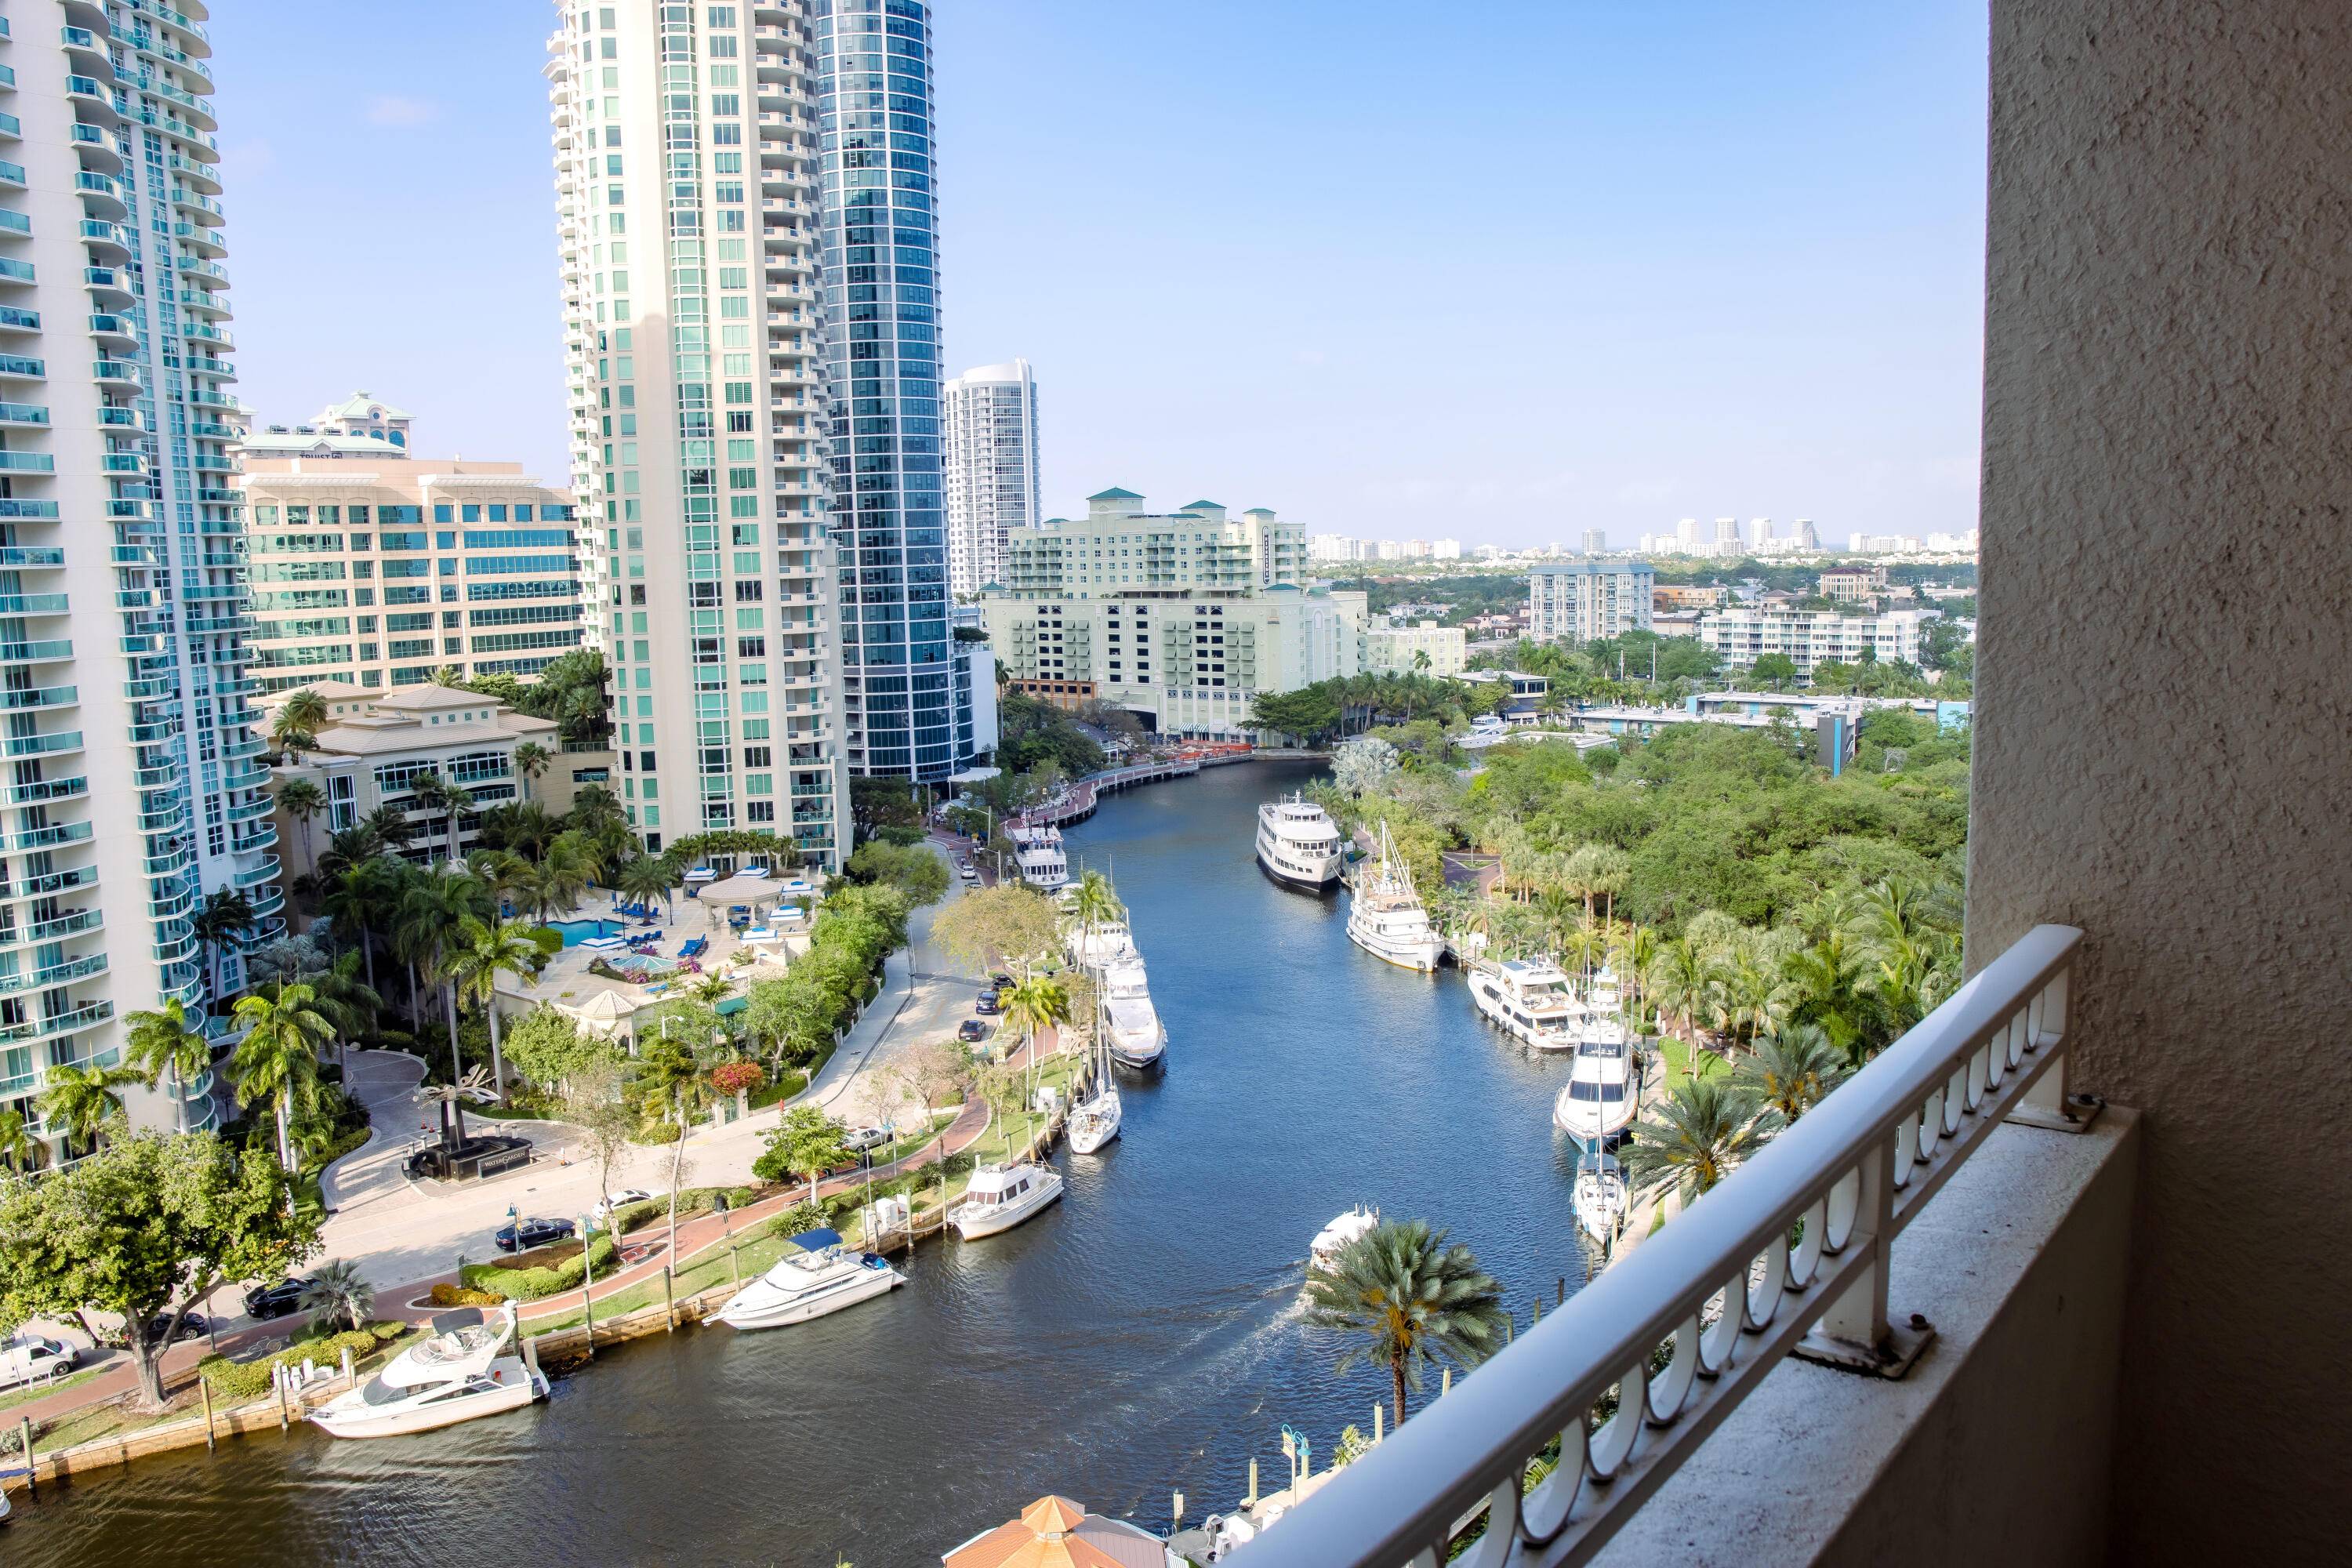 Experience Luxury Living Lifestyle with This Beautiful Single Bedroom Condo Over looking the New River in The Heart of Downtown Fort Lauderdale.